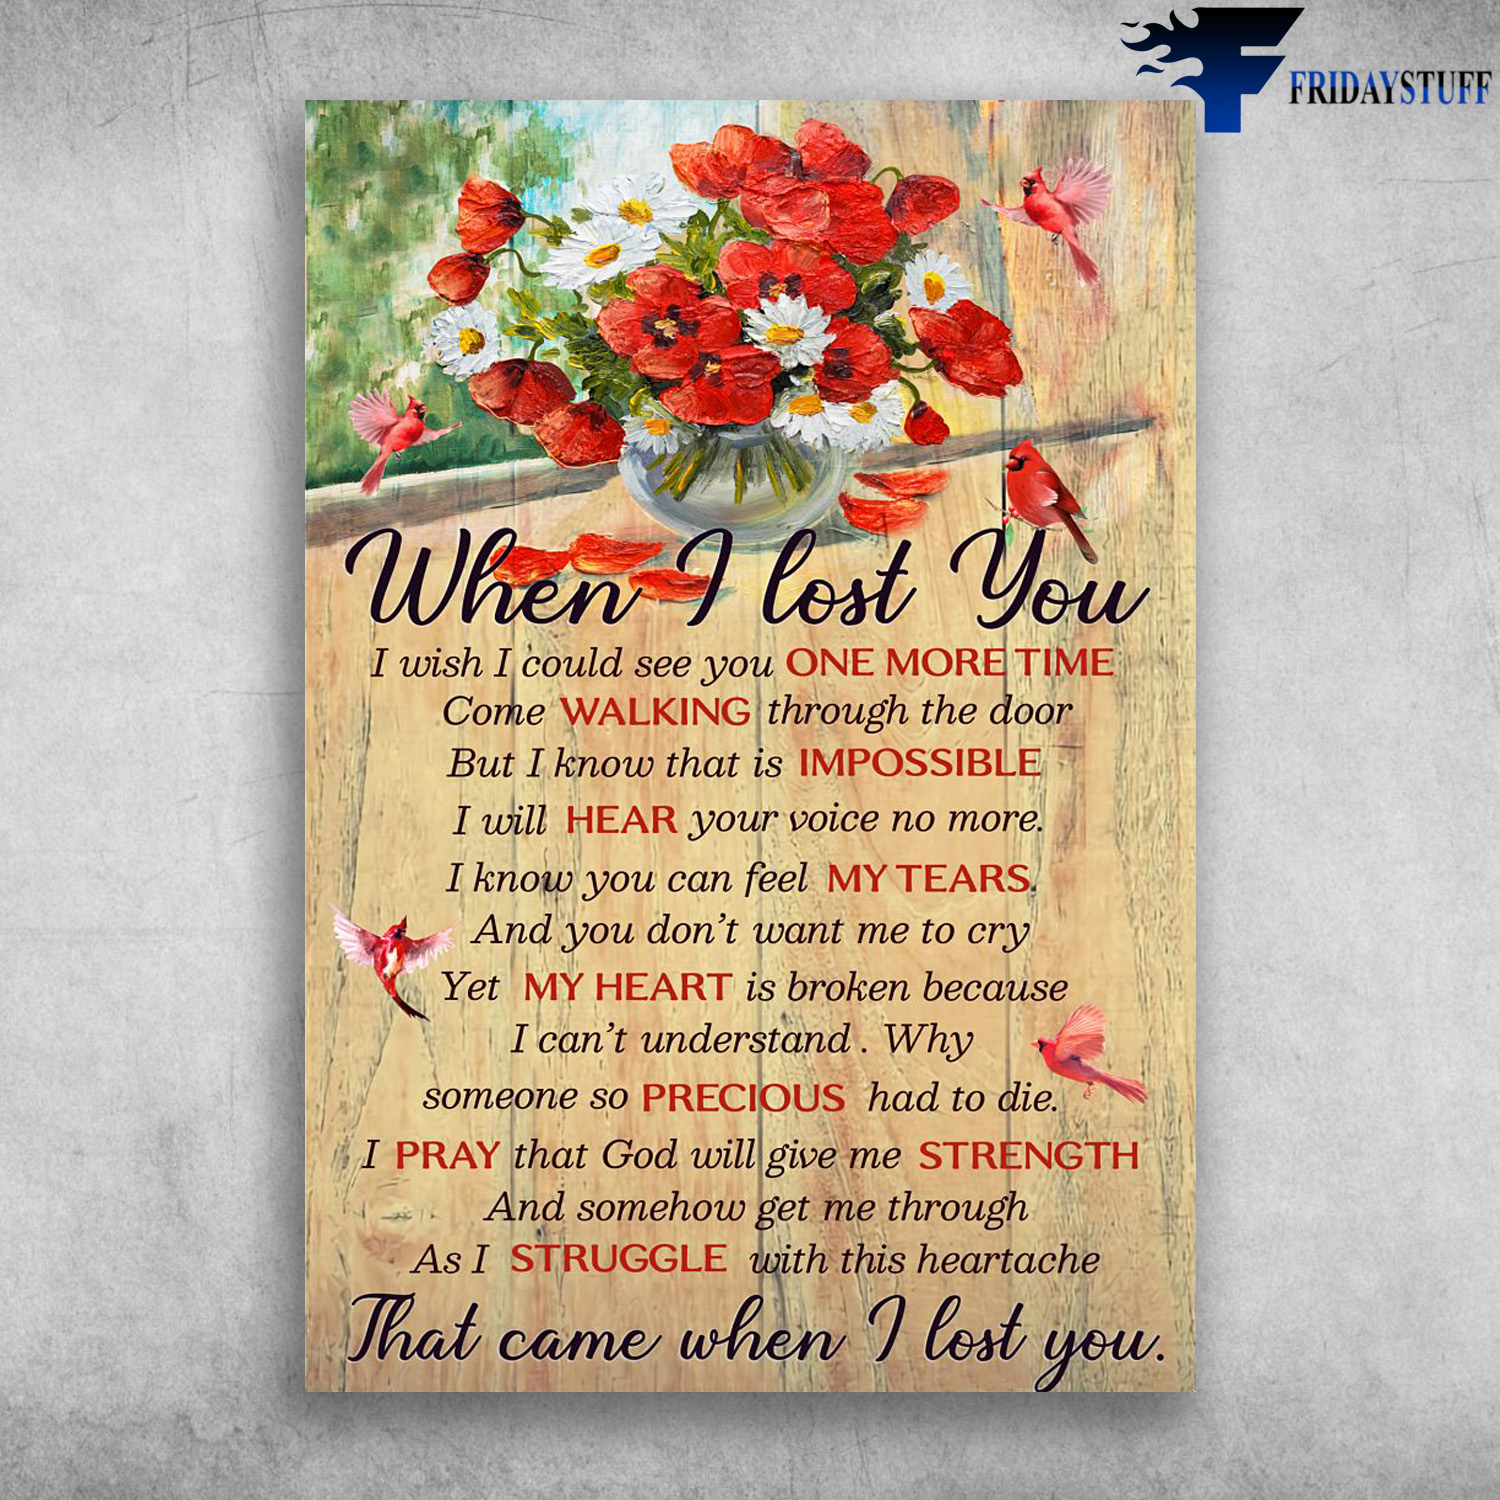 Cardinal Bird And Flower - When I Lost You, I Wish I Could See You One More Time, Come Walking Through The Door, But I Know That Is Impossible, I Will Hear Your Voice No More, That Became When I Lost You